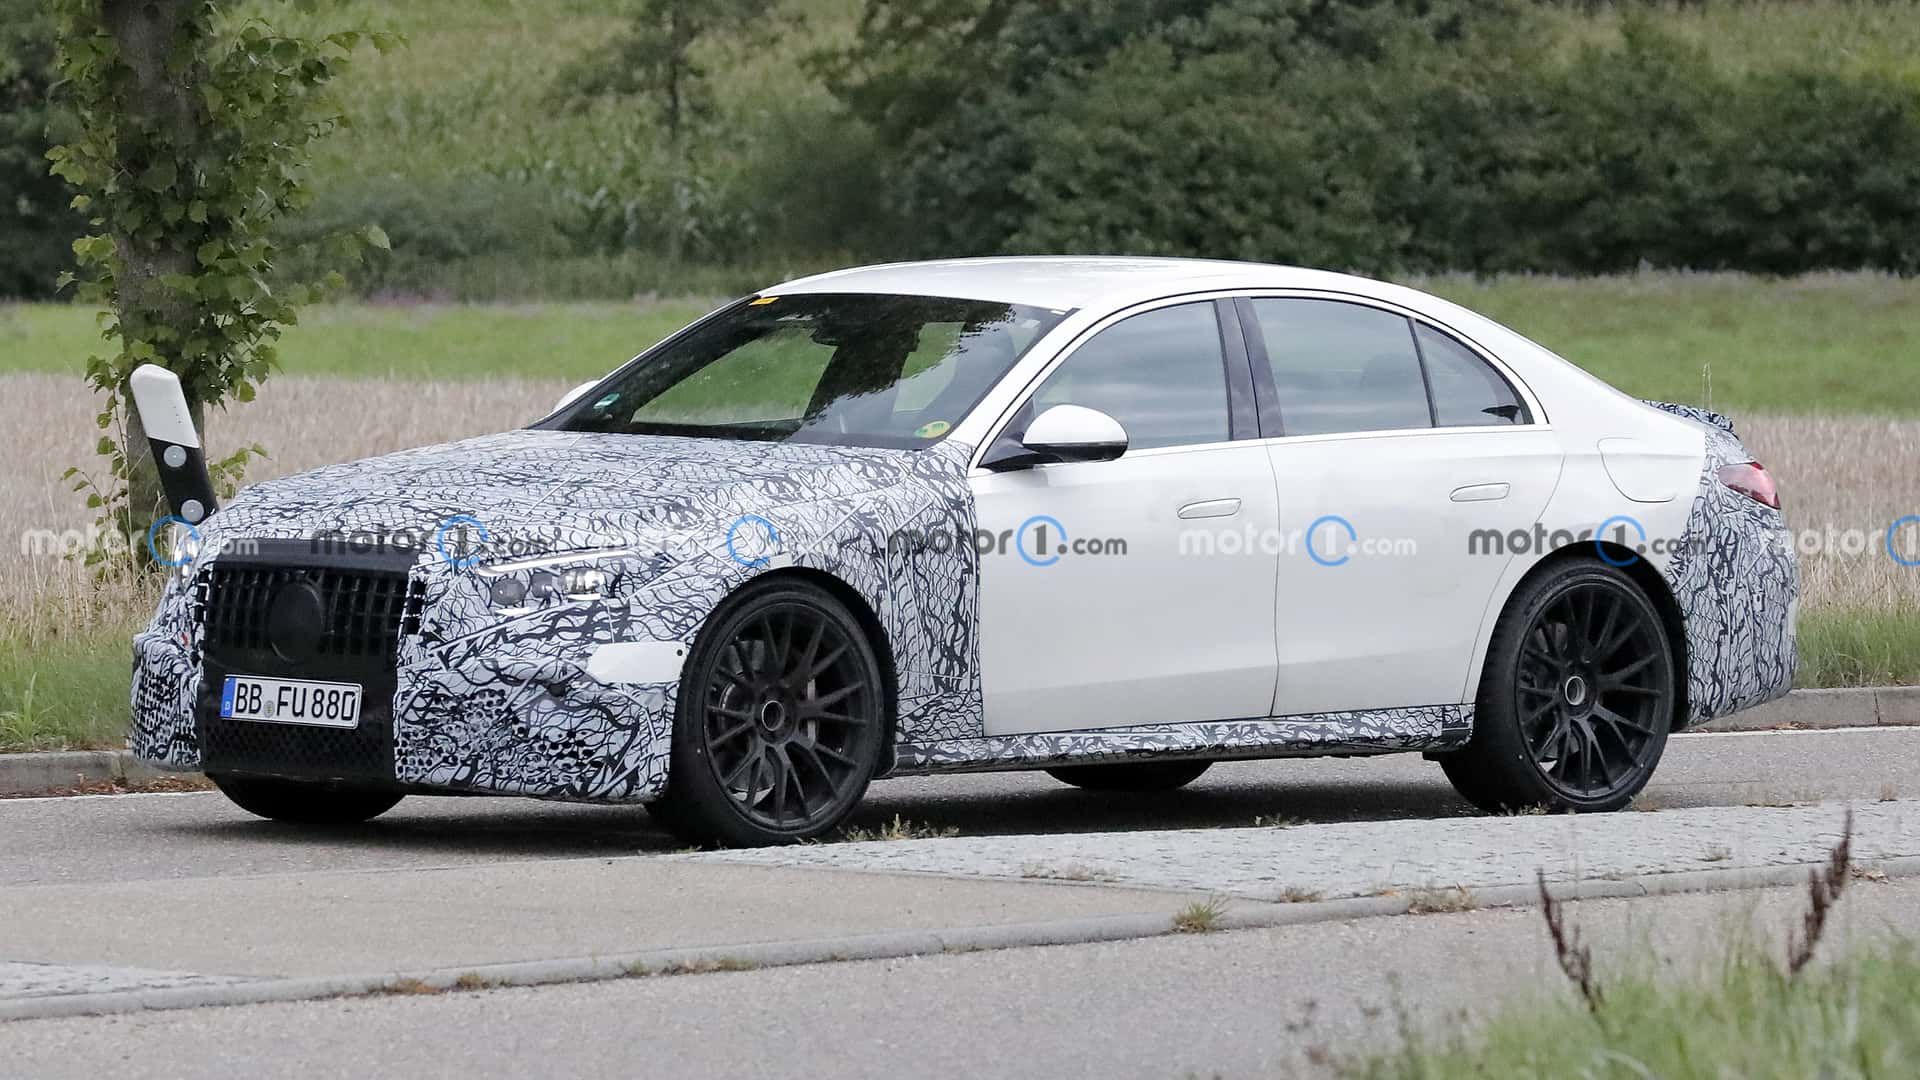 New Mercedes-AMG E53 Sedan And Wagon Spied With Less…